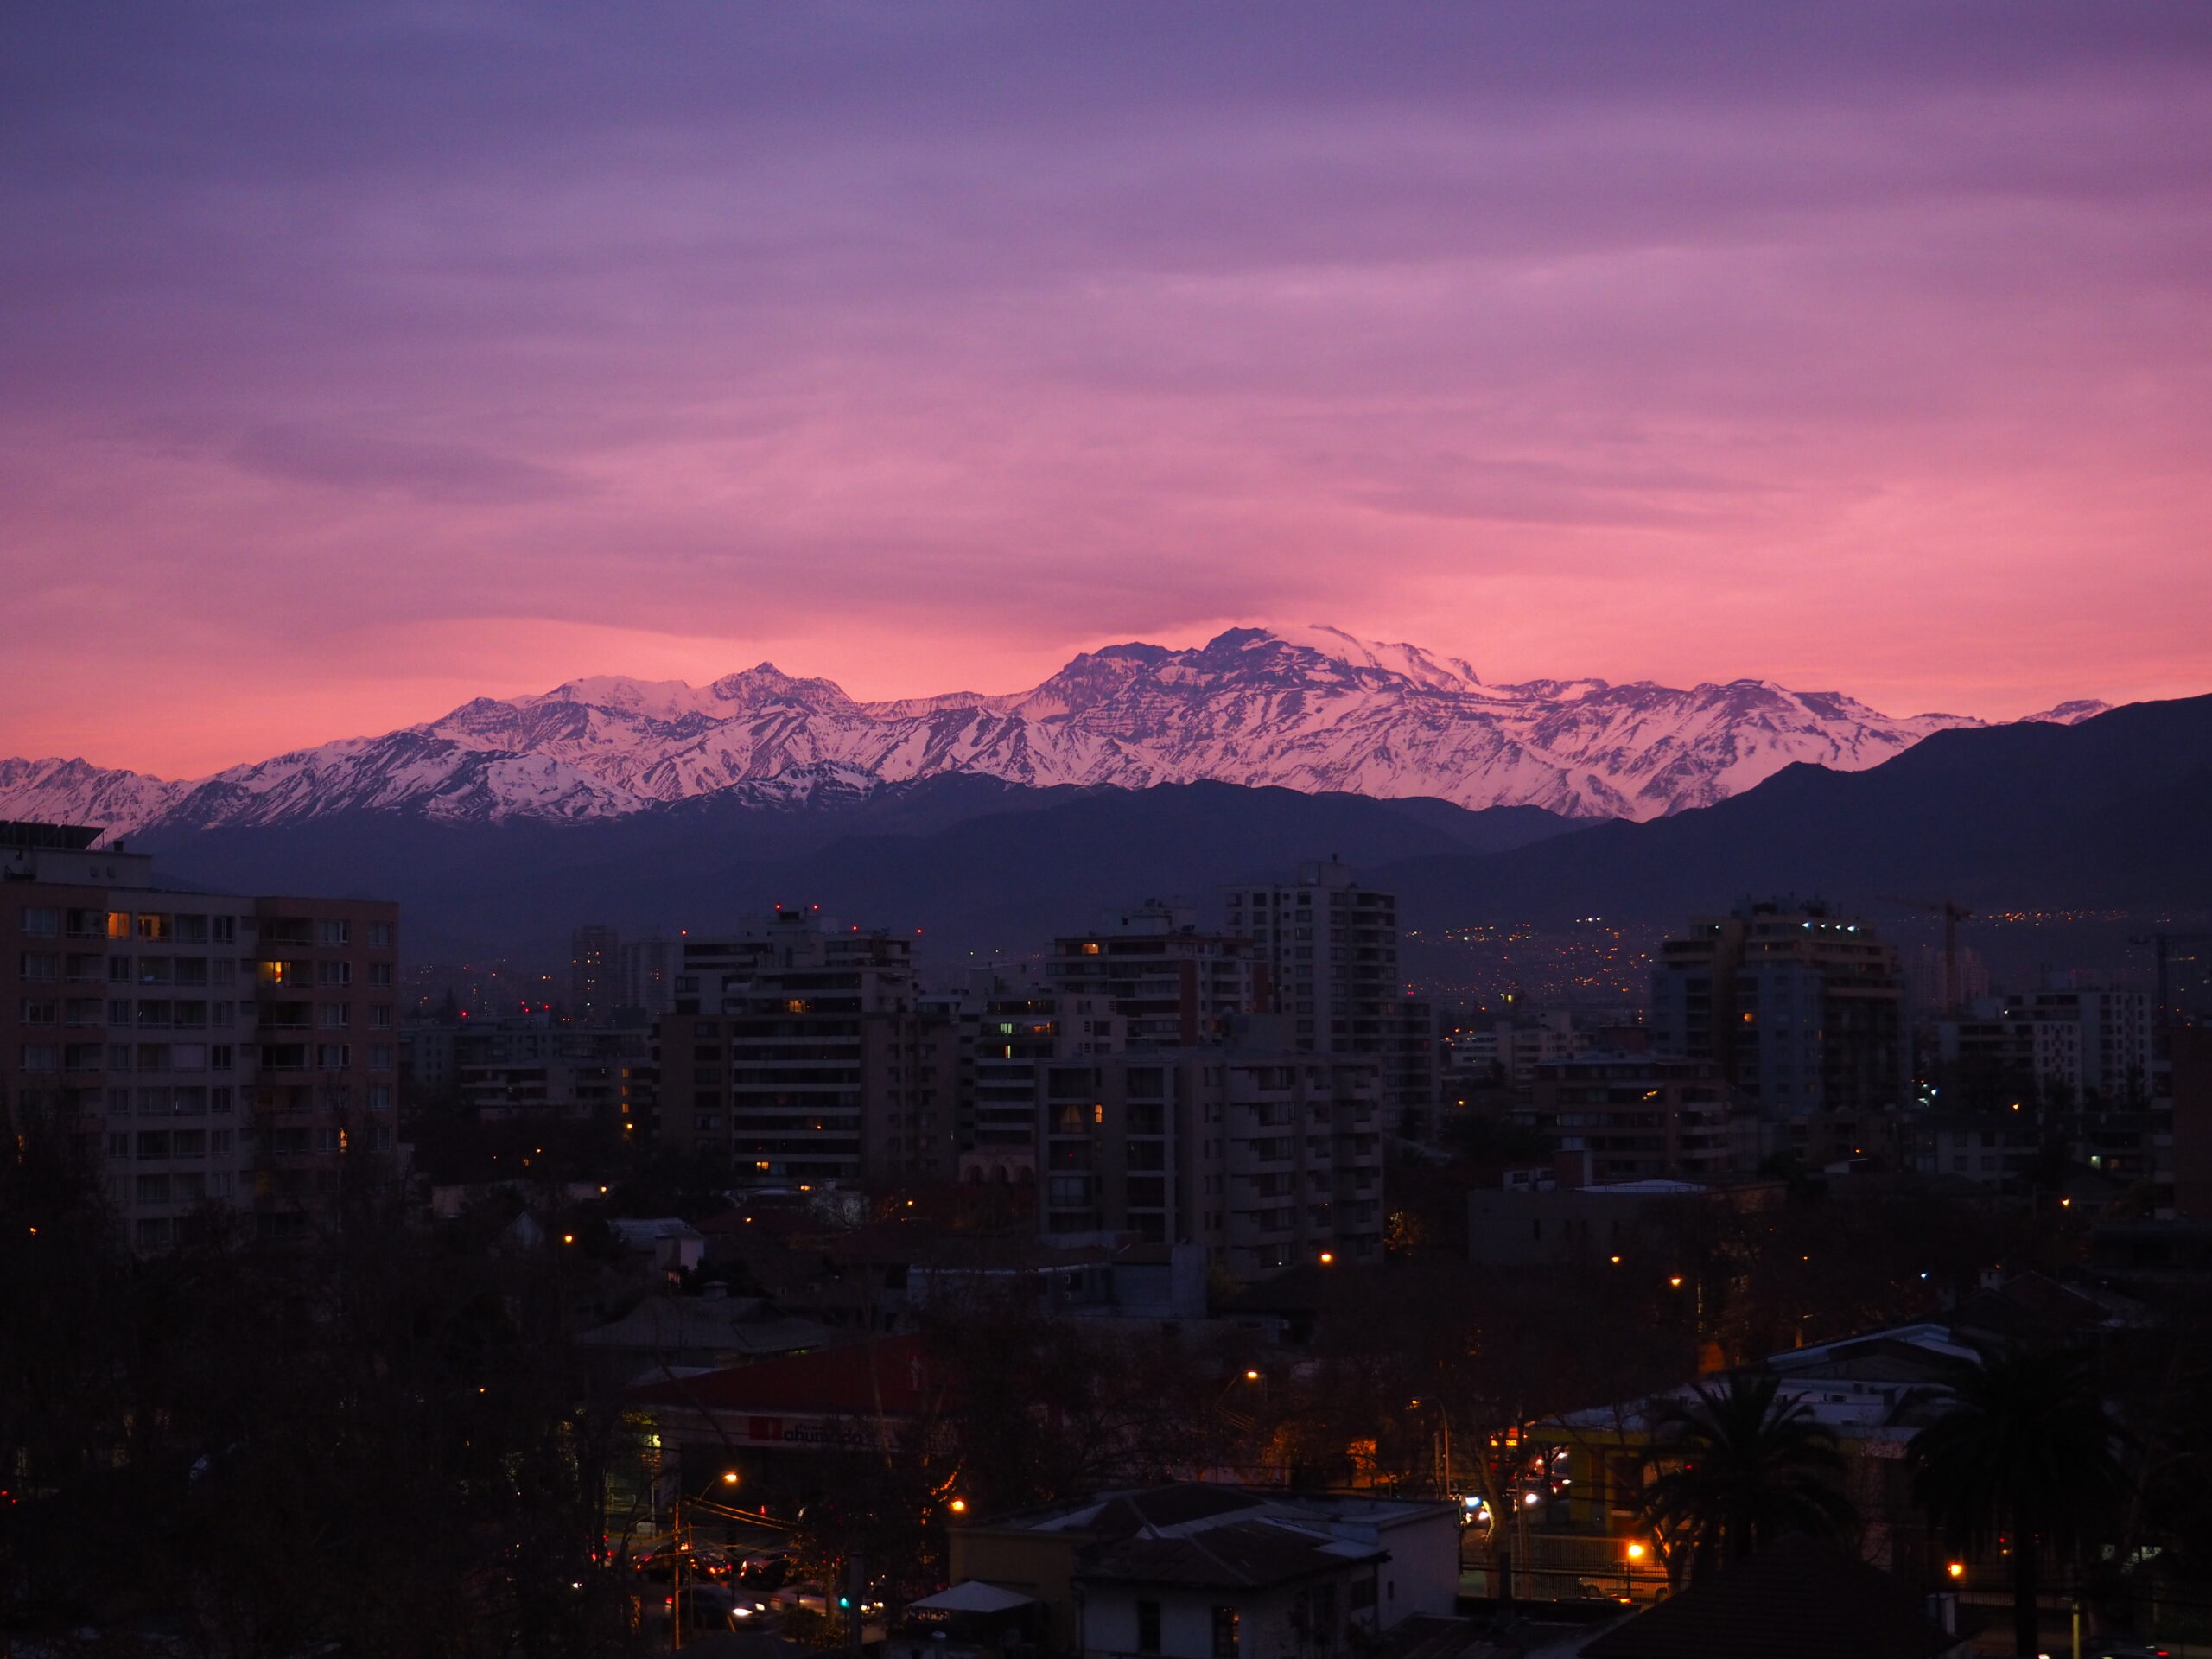 A twilight photo of a cityscape and mountains in the background.